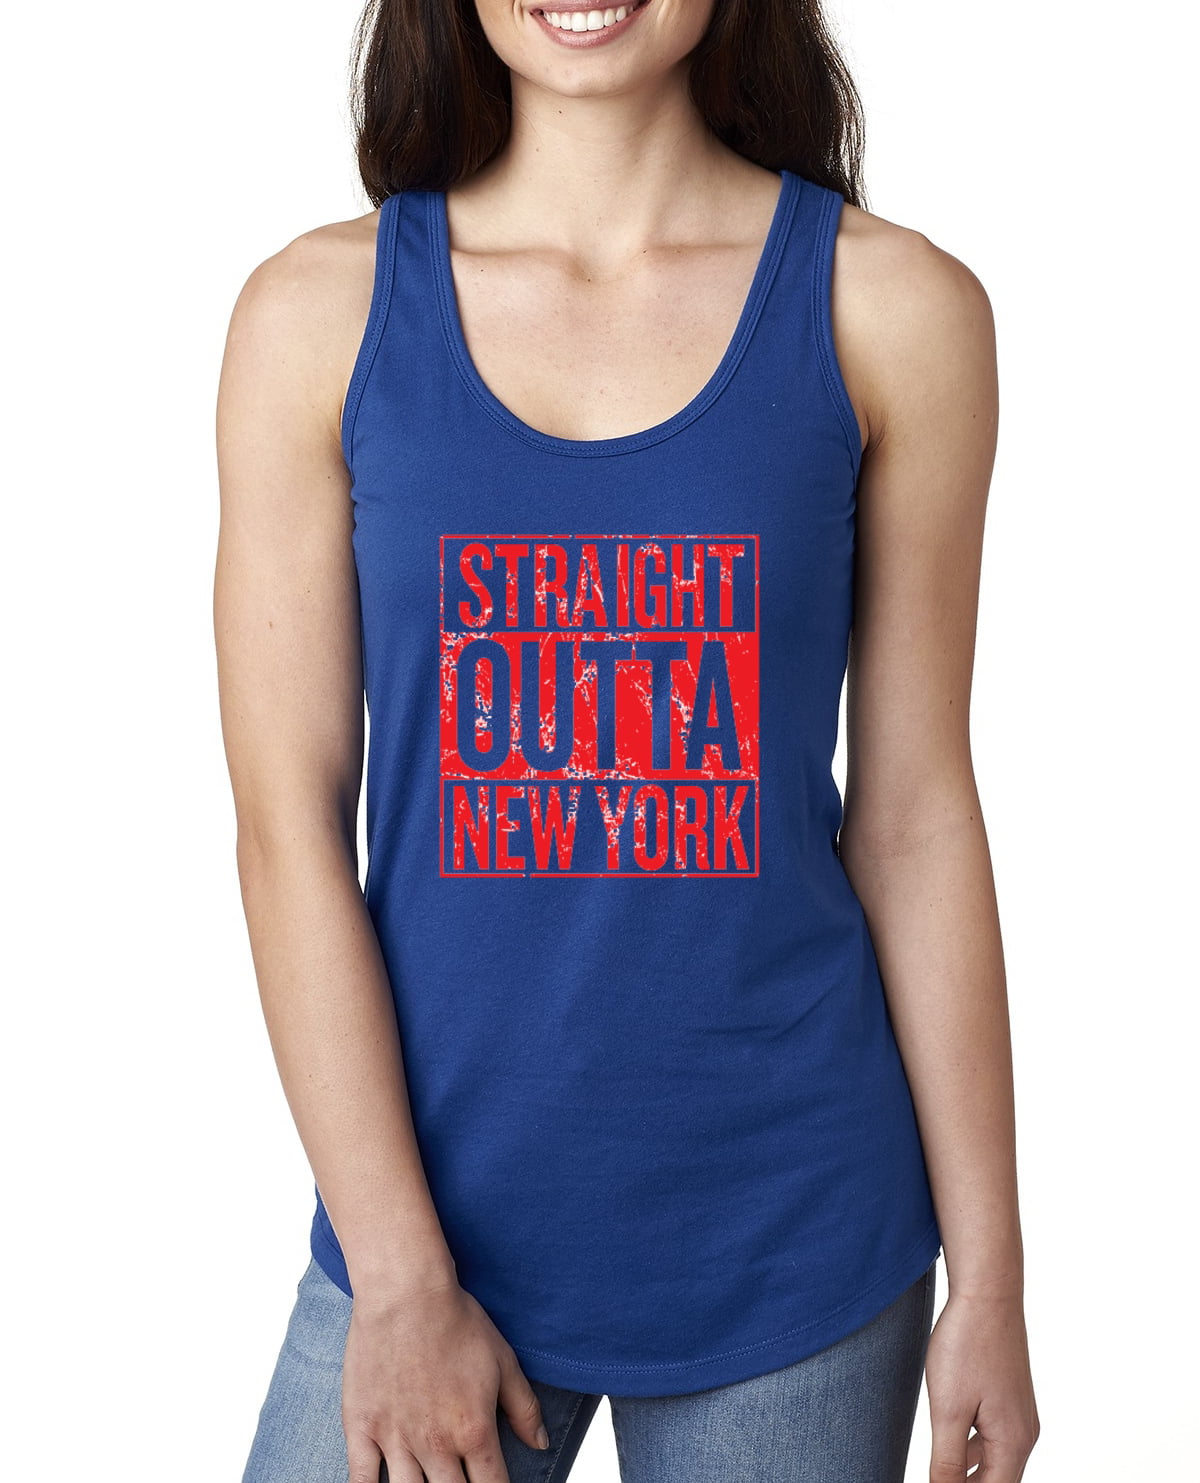 Sports Outdoors Womens Tank Tops